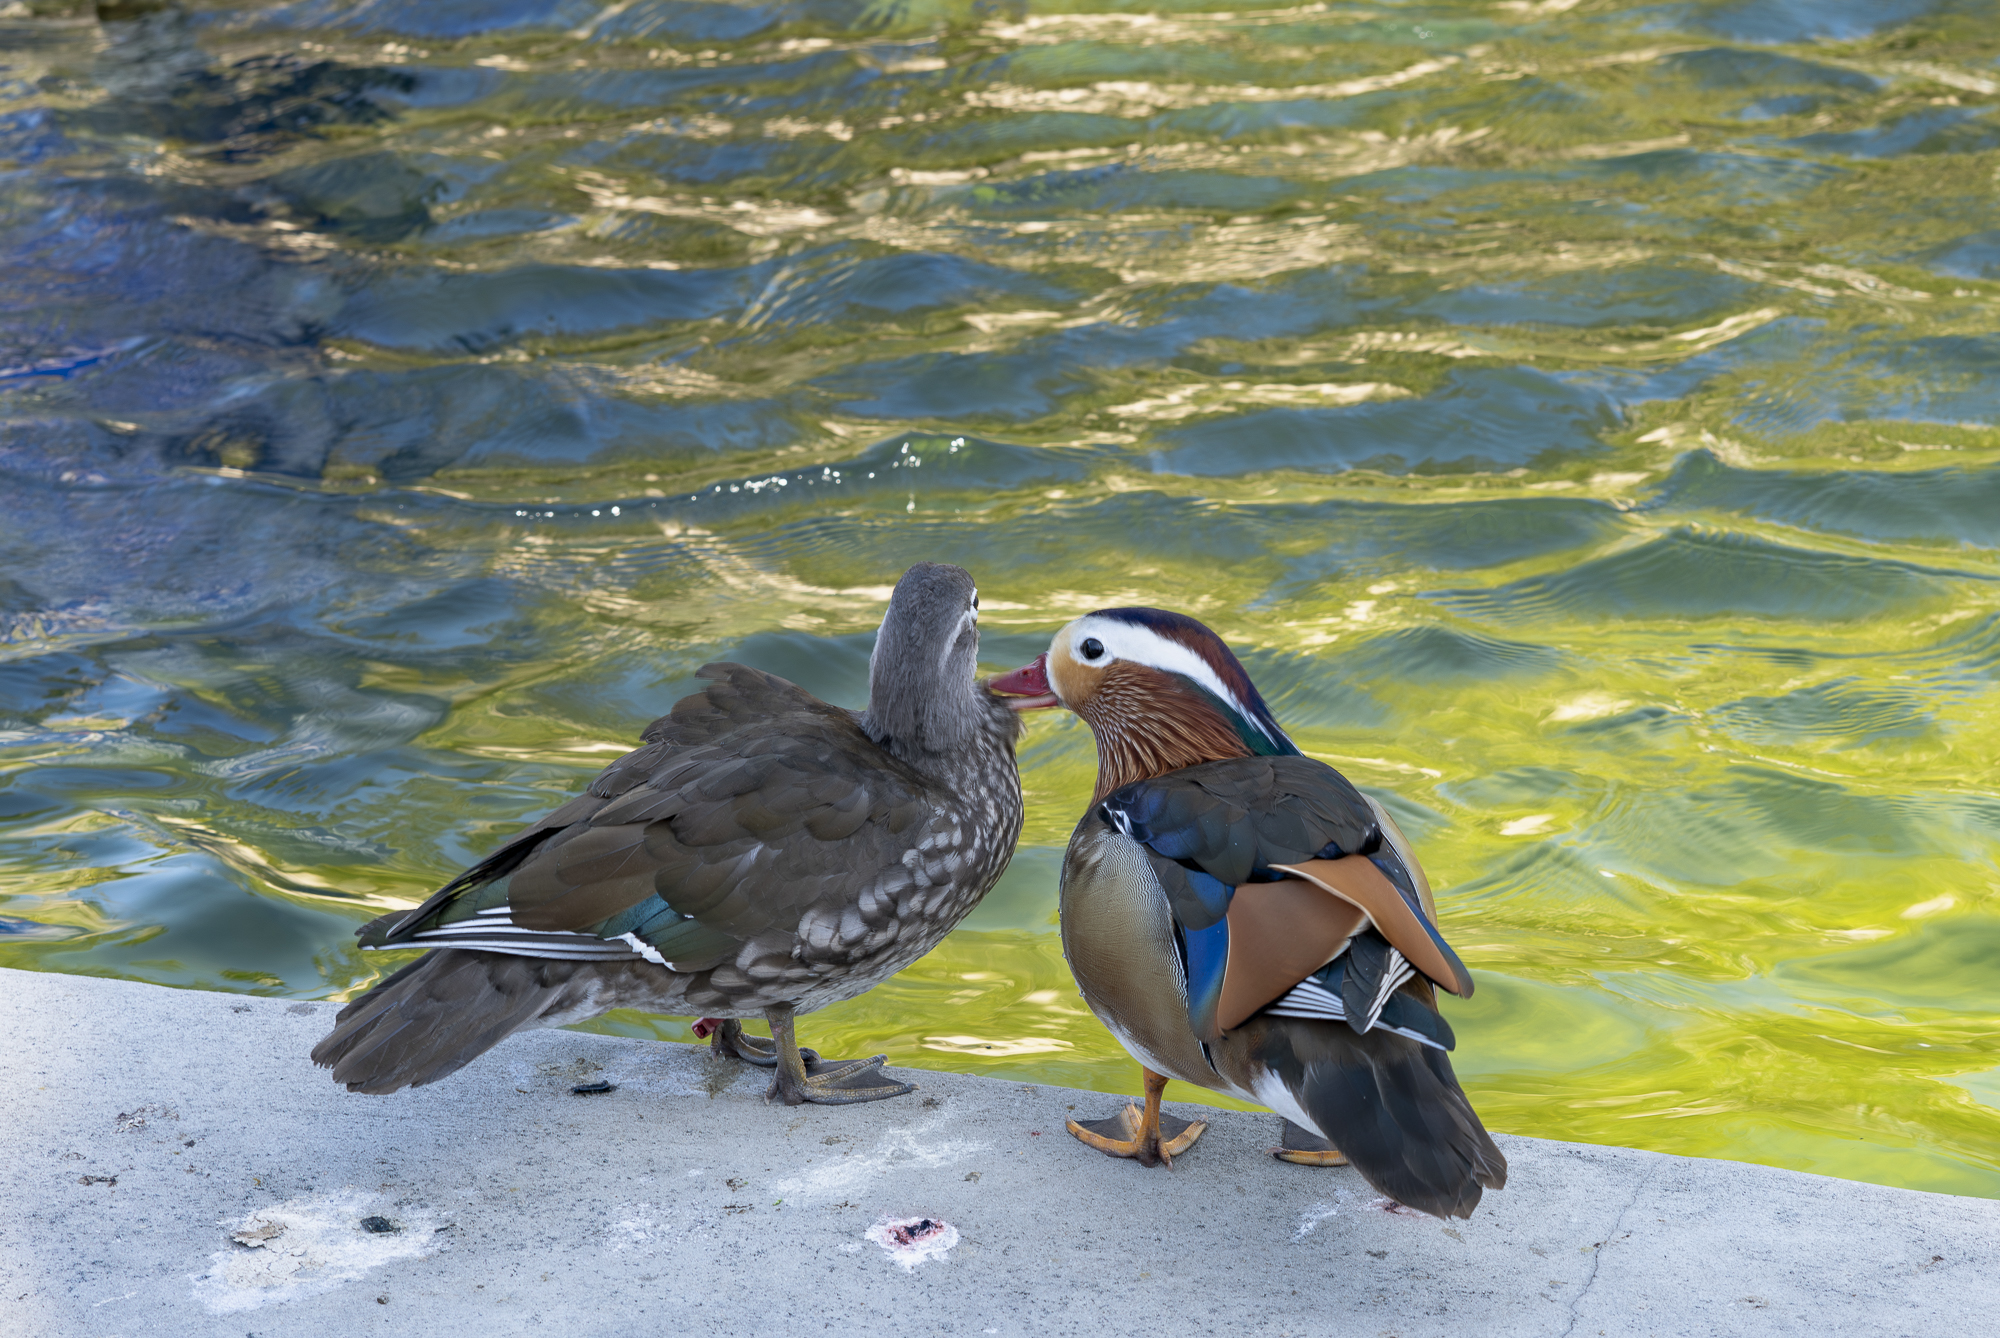 Two Mandarin Ducks: males are among the most colorful